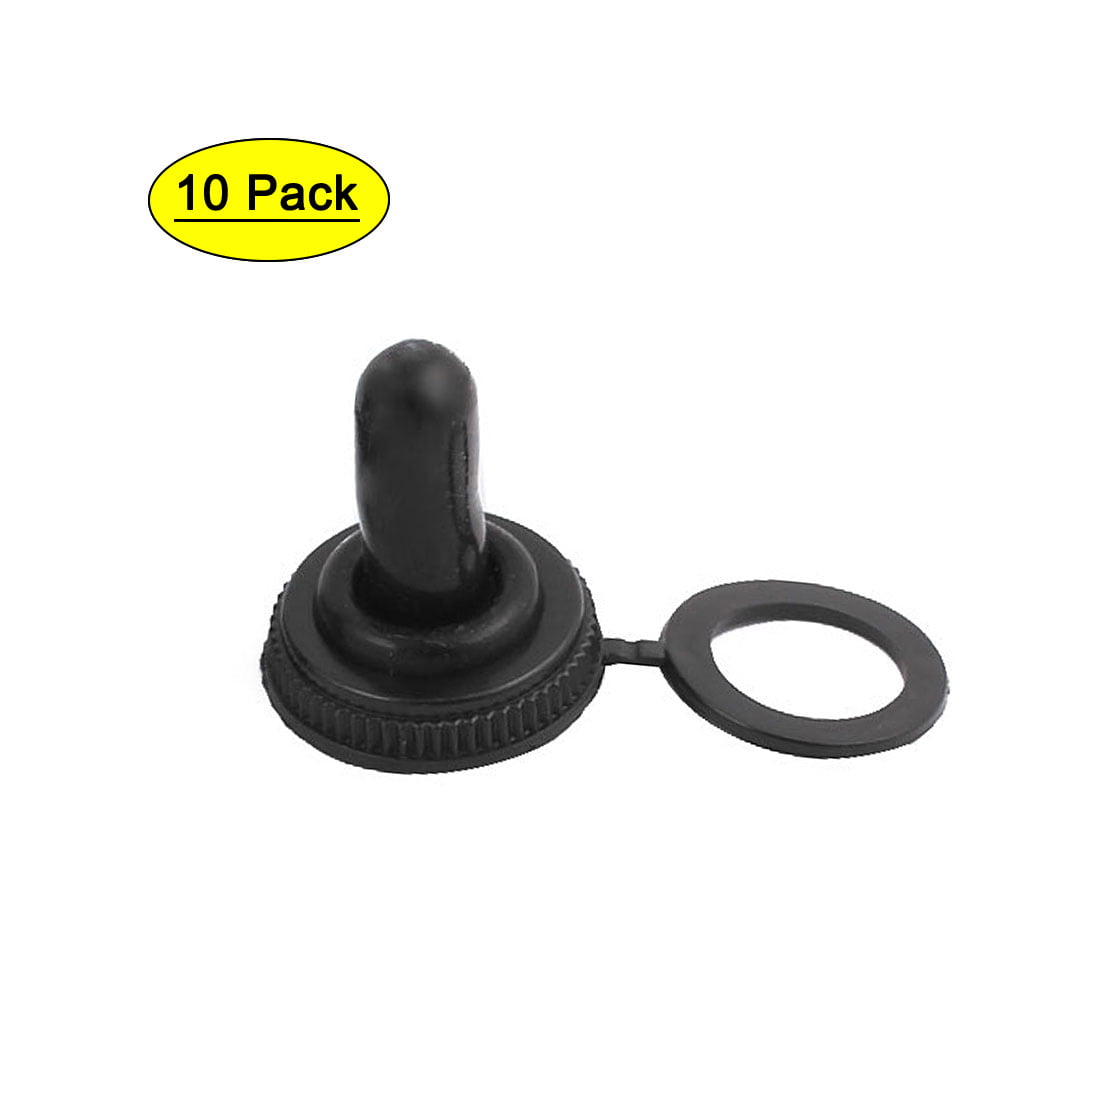 20Pcs Toggle Switch Waterproof Waterproof Knob Hat Rubber Boot Cover Fit For